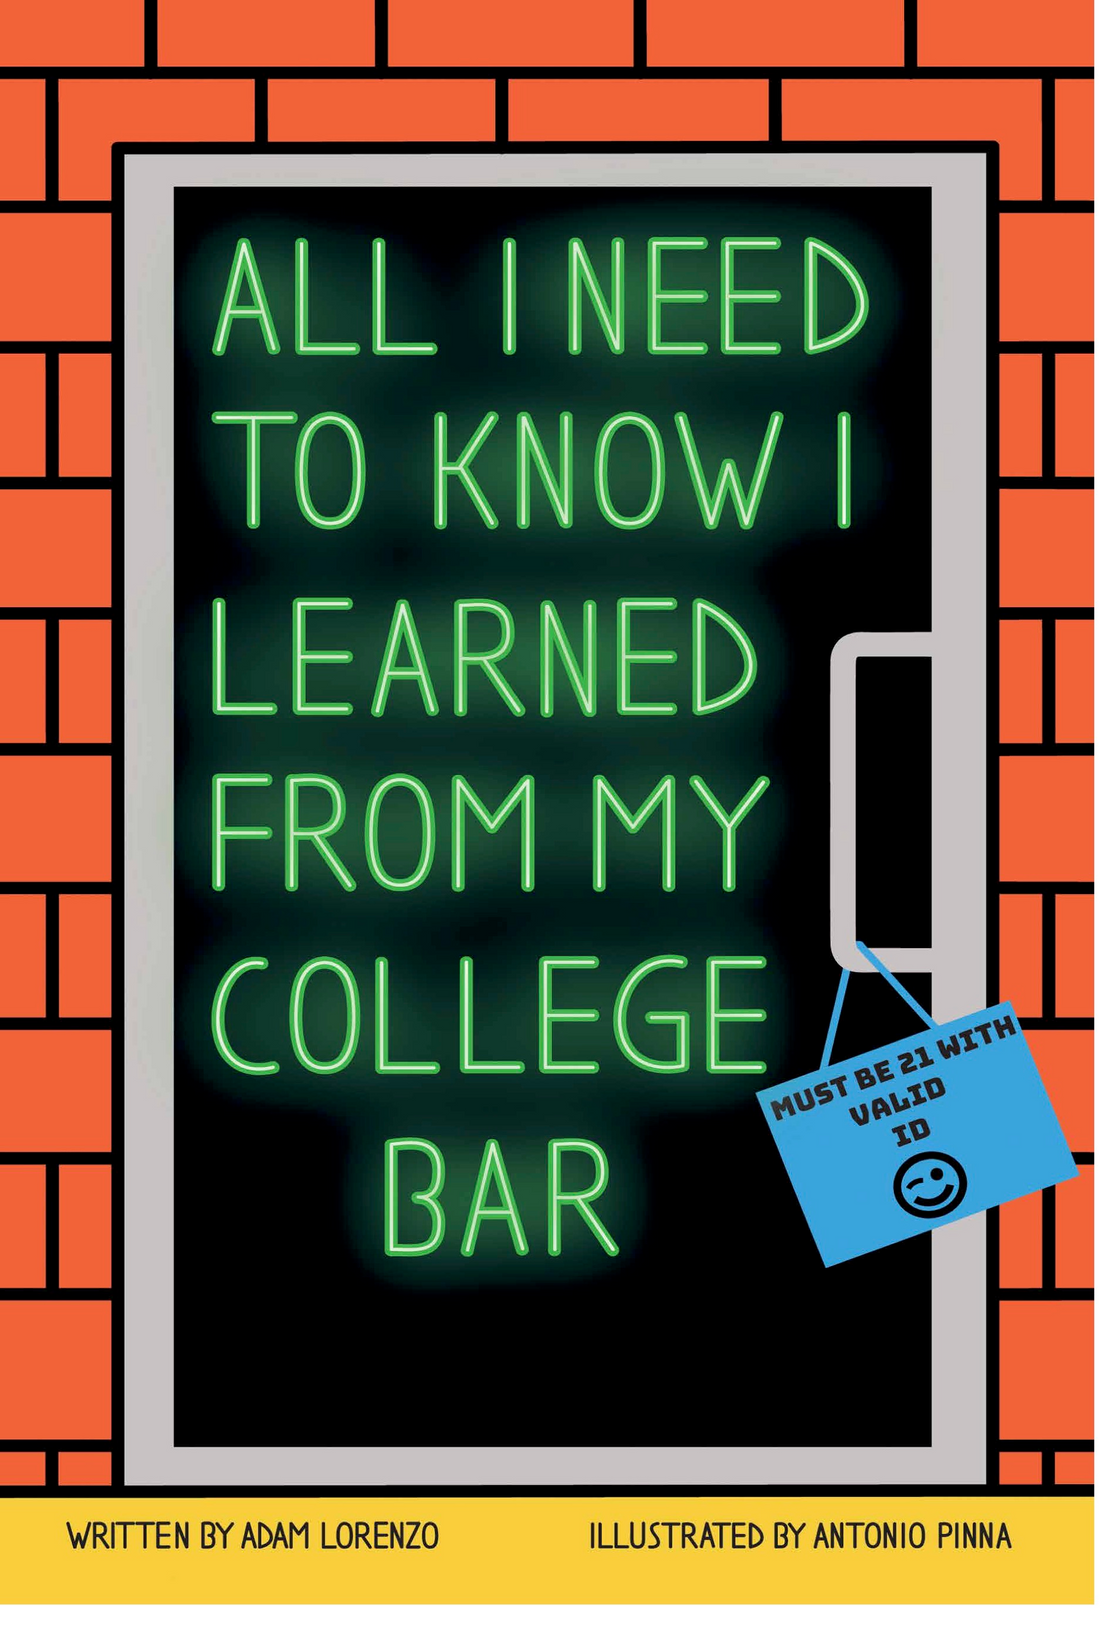 The Ultimate College Gift: "All I Need to Know I Learned From My College Bar" - Online at Walmart